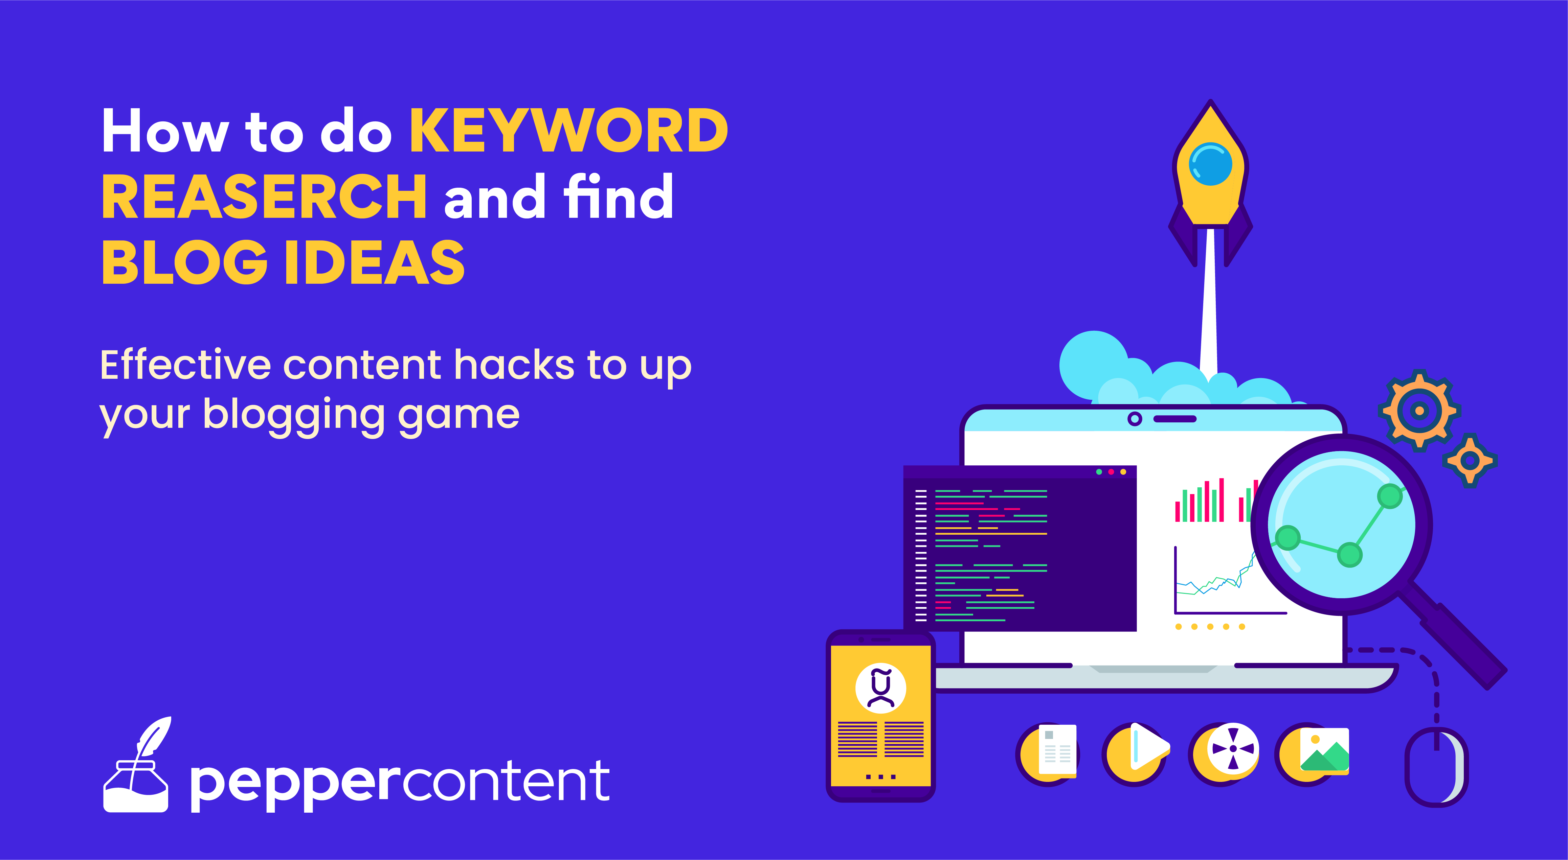 Content Hack: Here’s How to Do Keyword Research and Find Blog Ideas at the Same Time